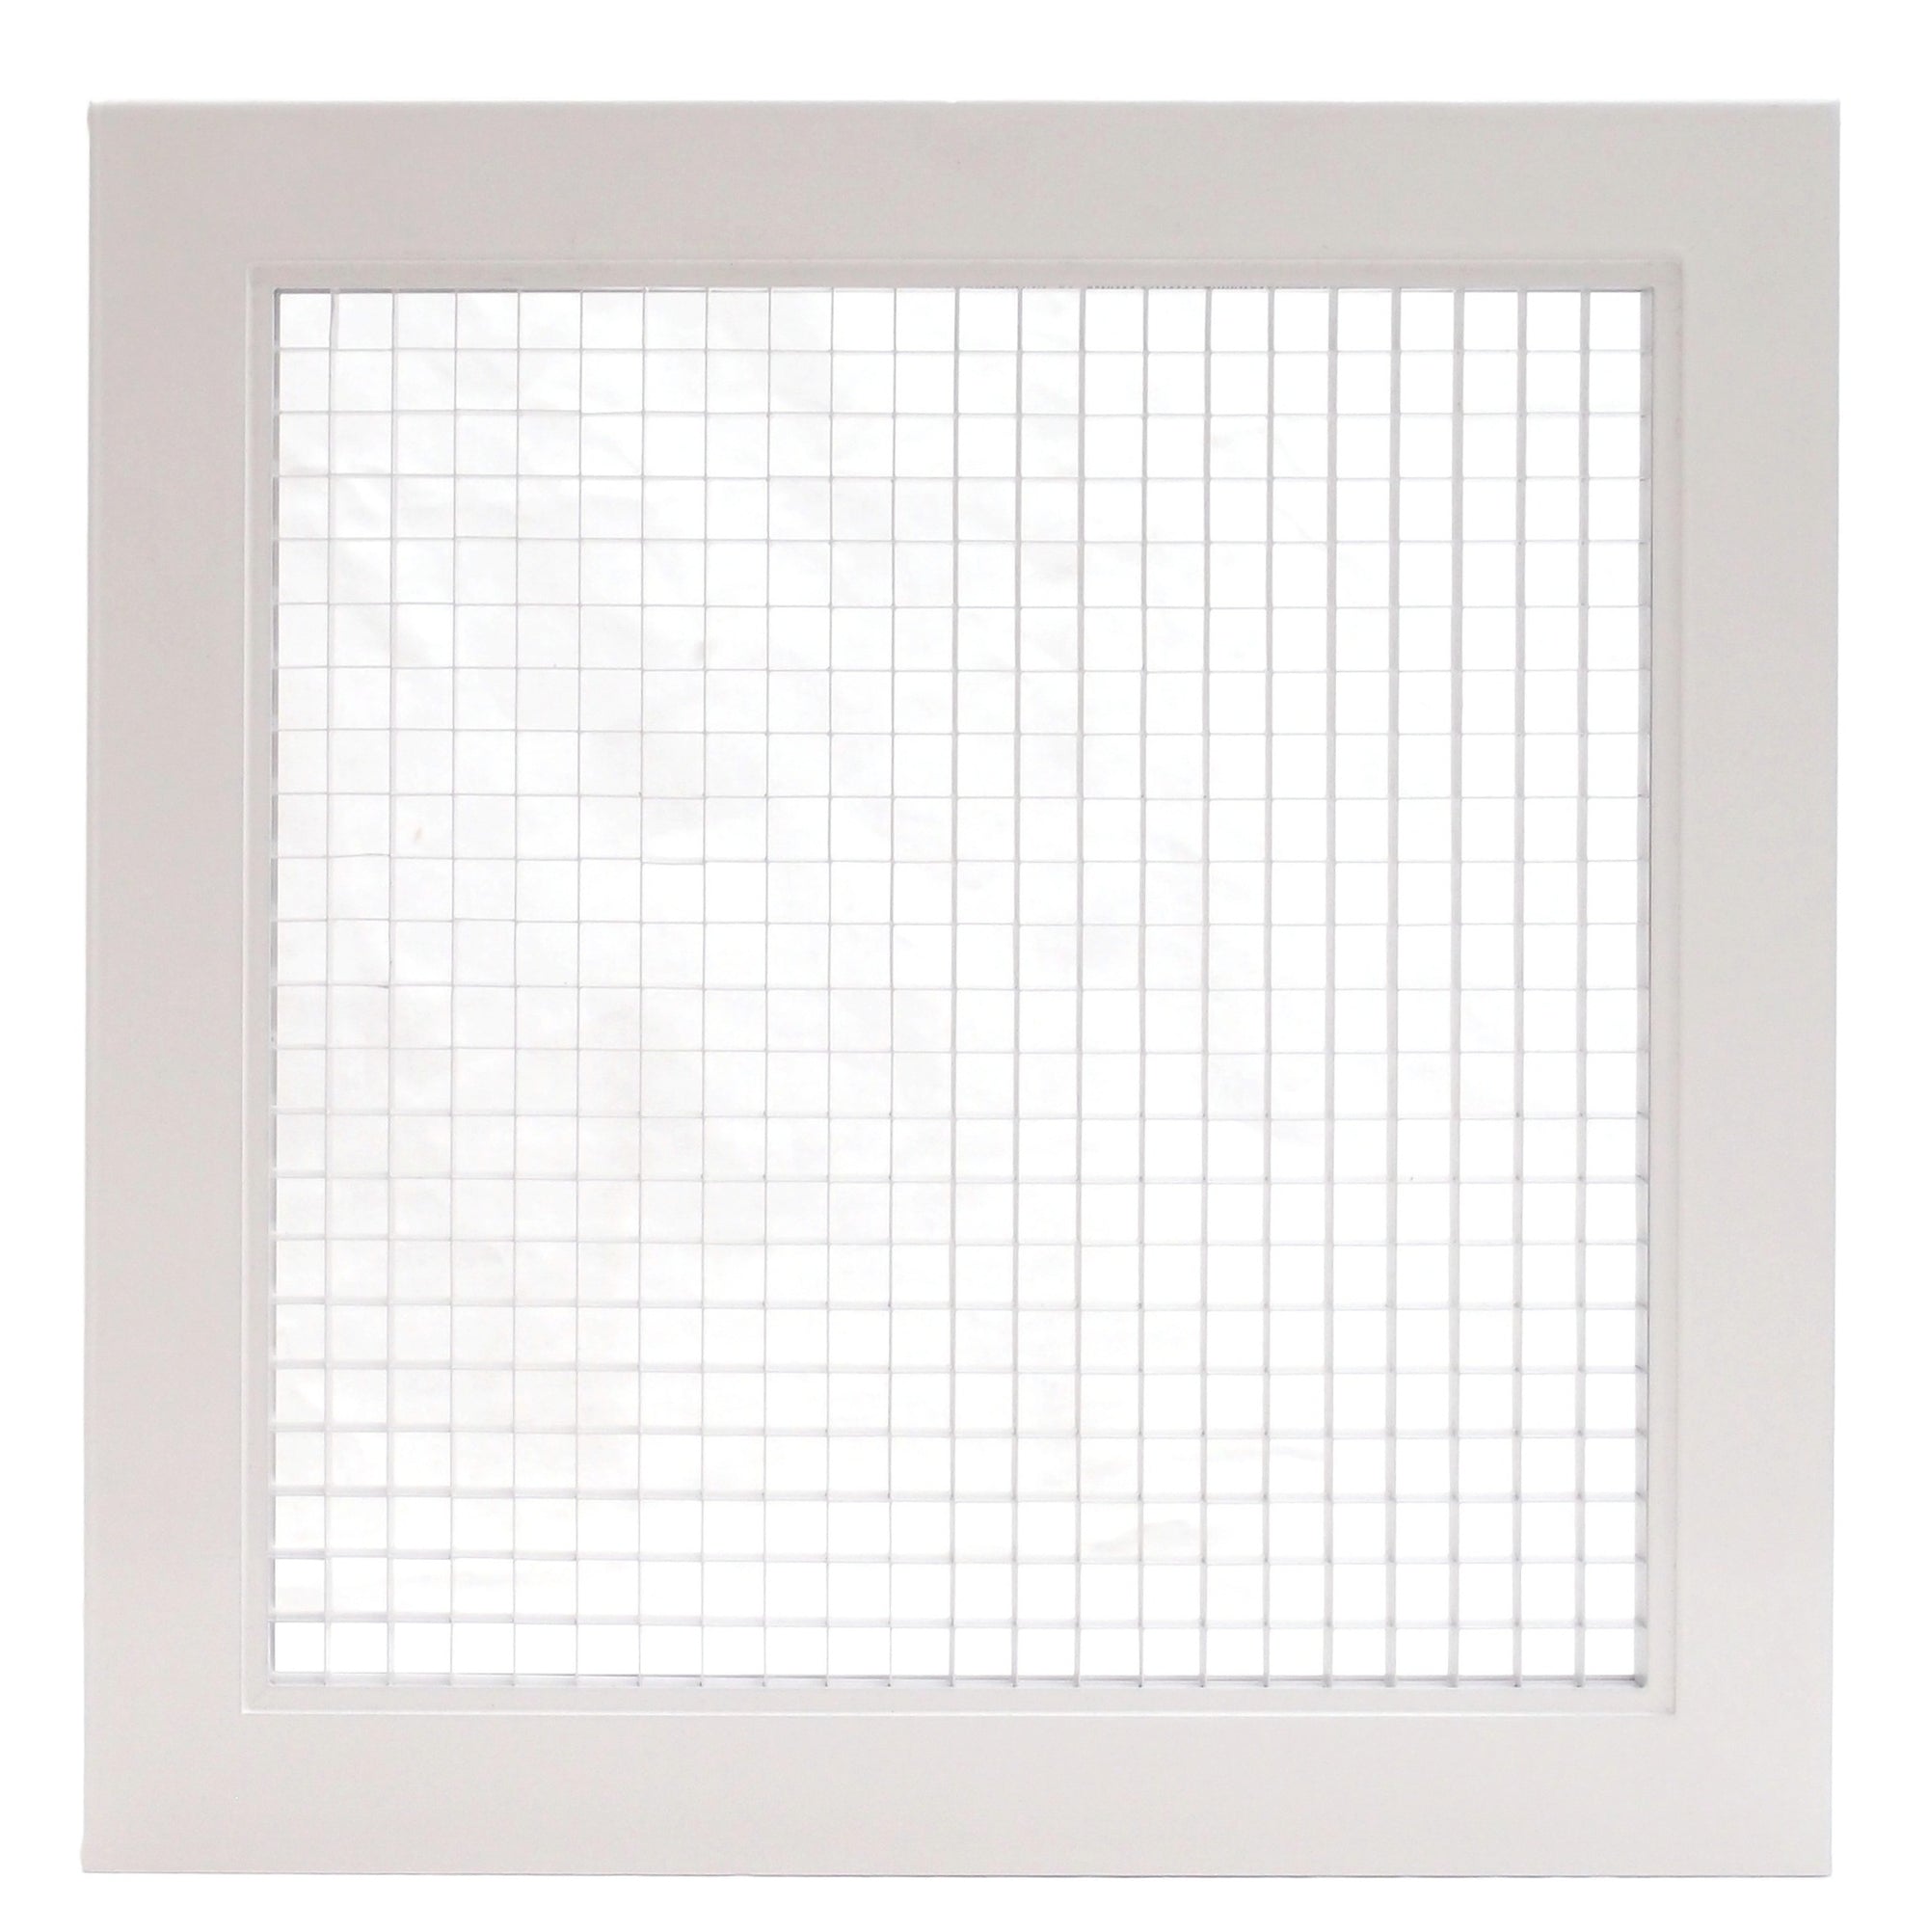 36" x 6" Cube Core Eggcrate Return Air Filter Grille for 1" Filter